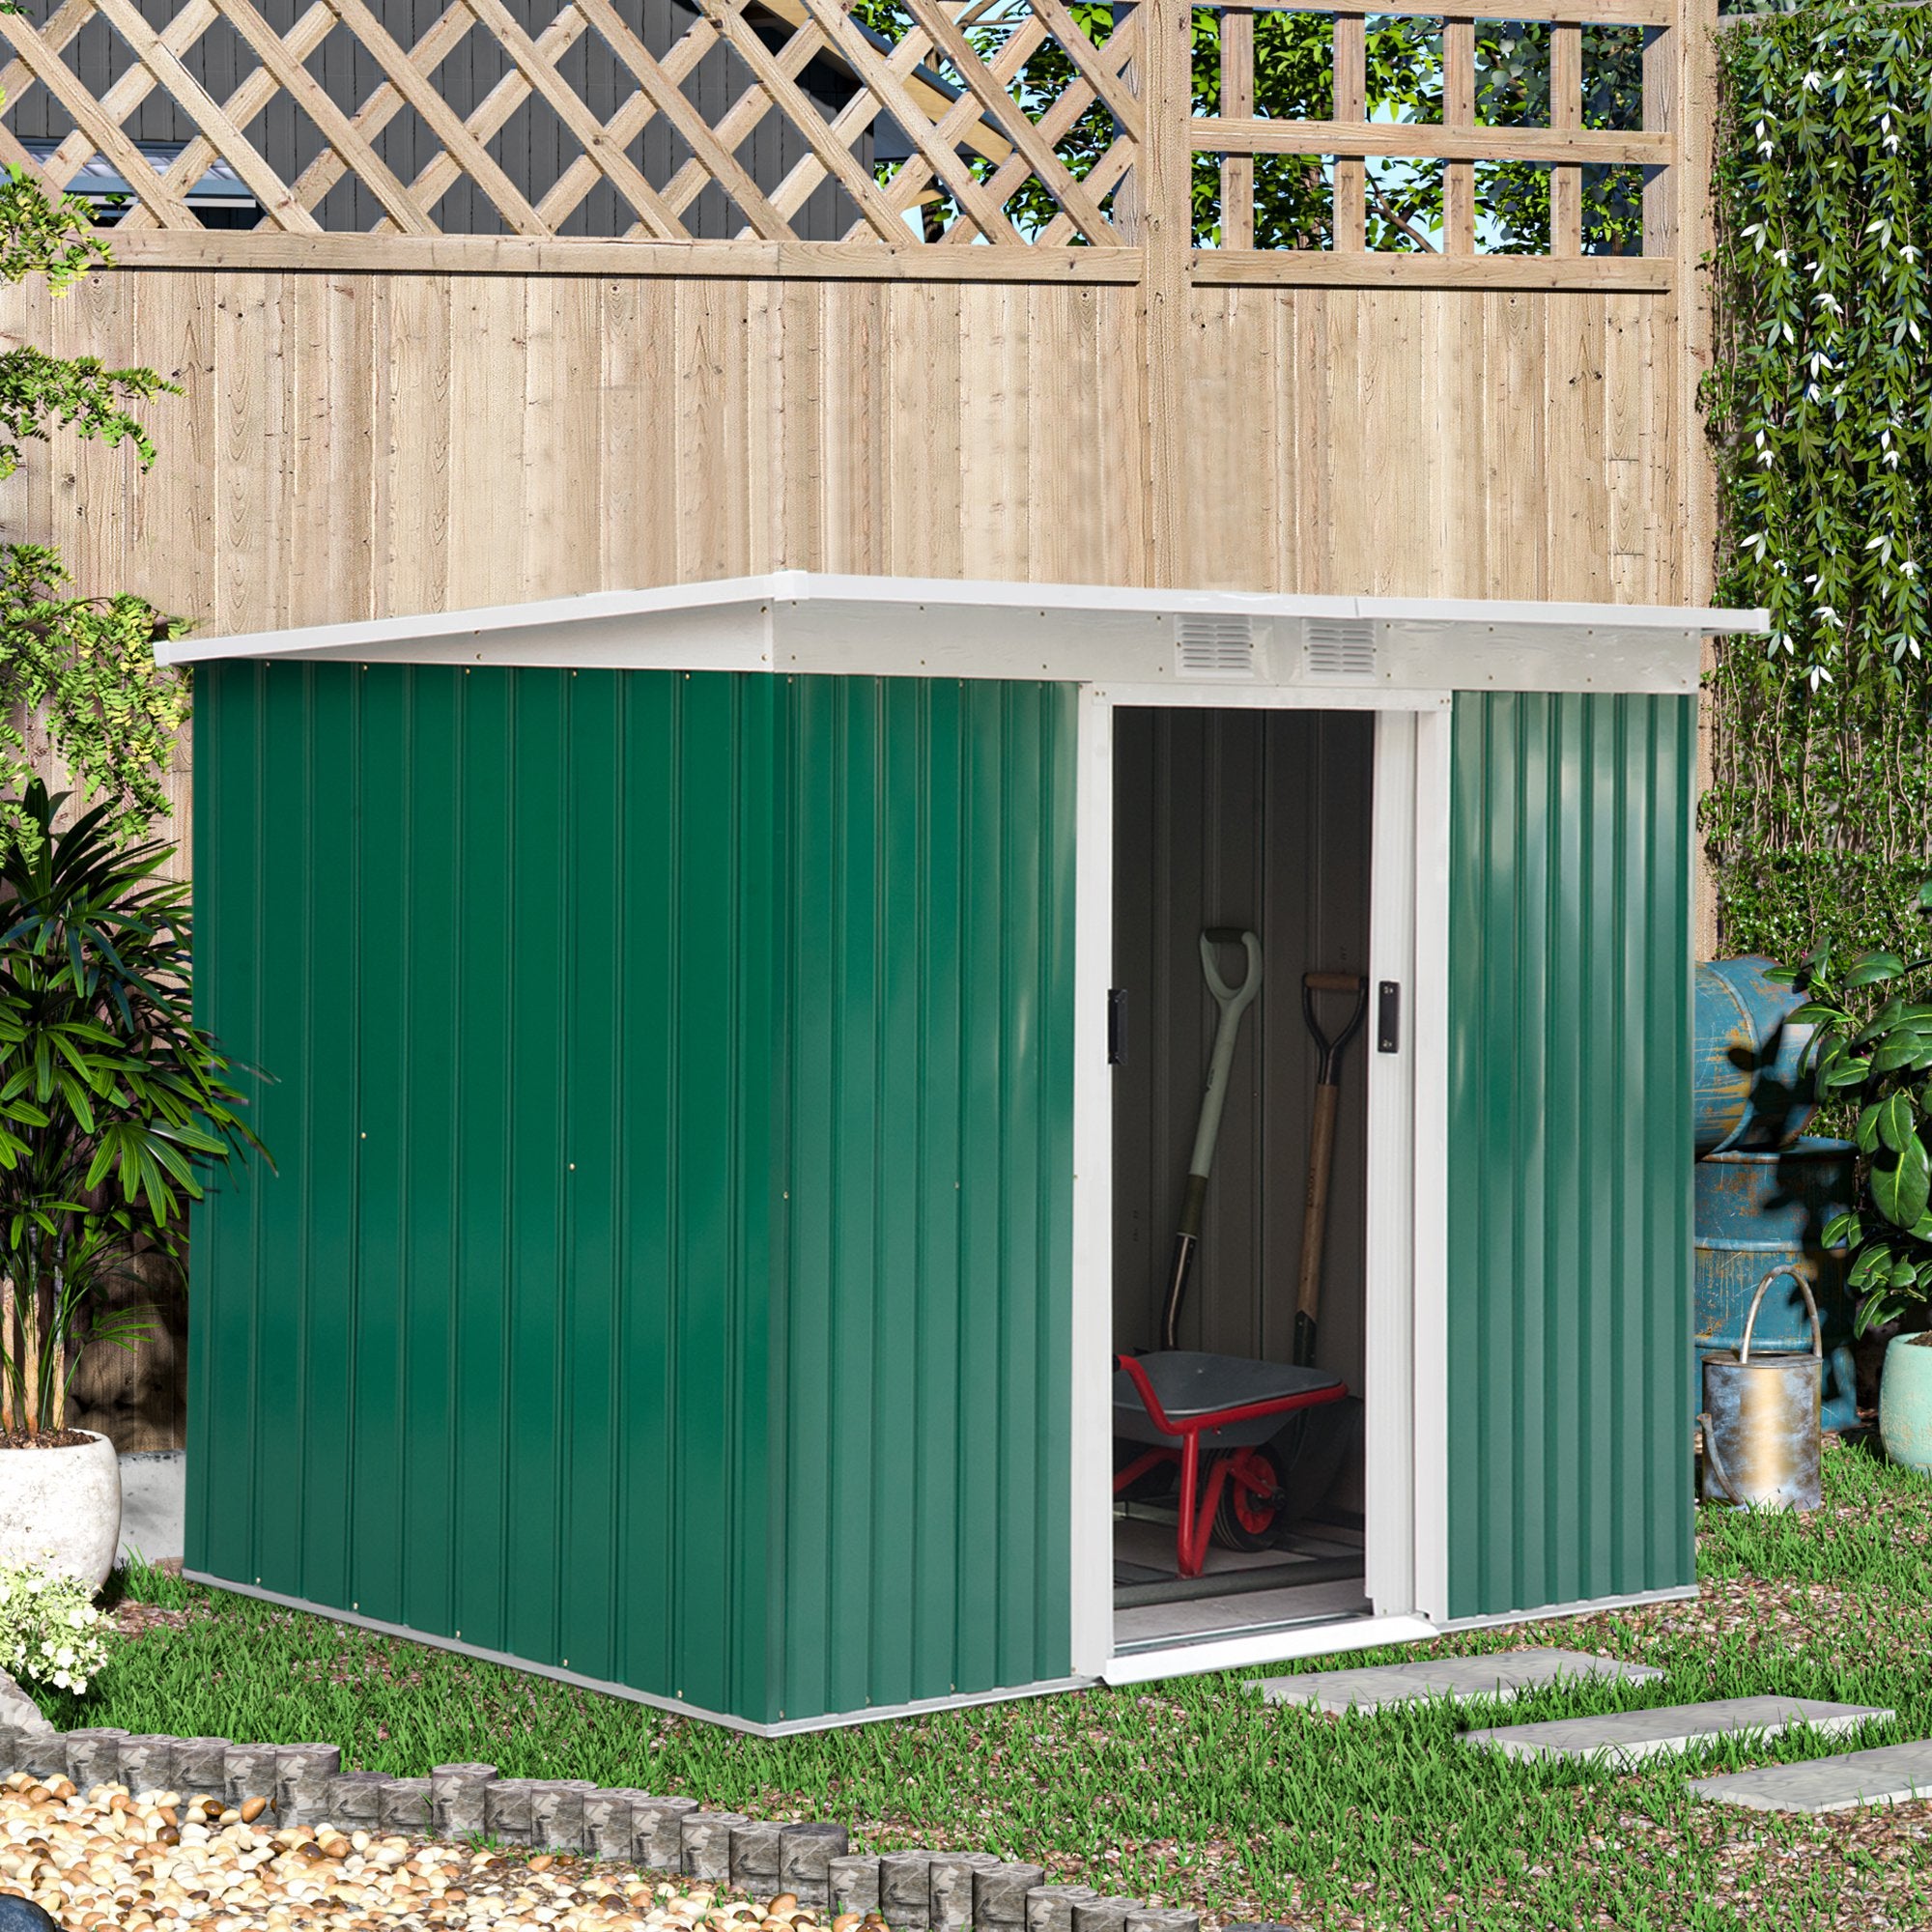 9’ x 4’ Outdoor Rust Resistant Metal Garden Vented Storage Shed Metal Tool Storage House - Green/White